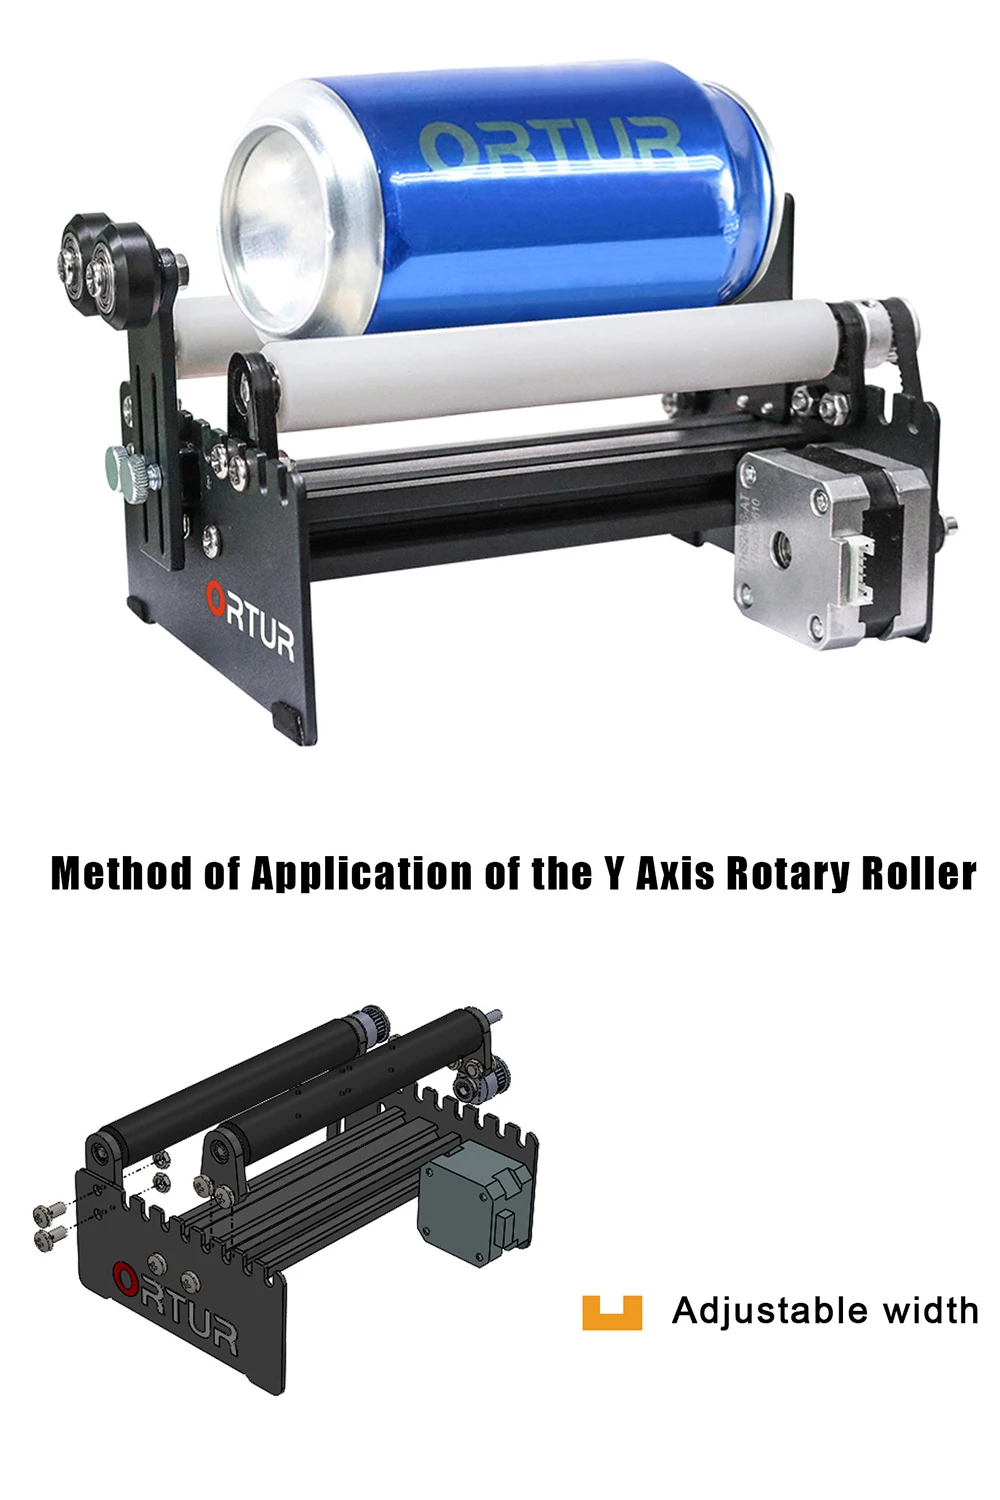 Ortur Y-axis Rotary Roller with Separable Support Compatible 100% Of Laser Engraver Aufero Upgraded Stereoscopic Engraving Tools enlarge